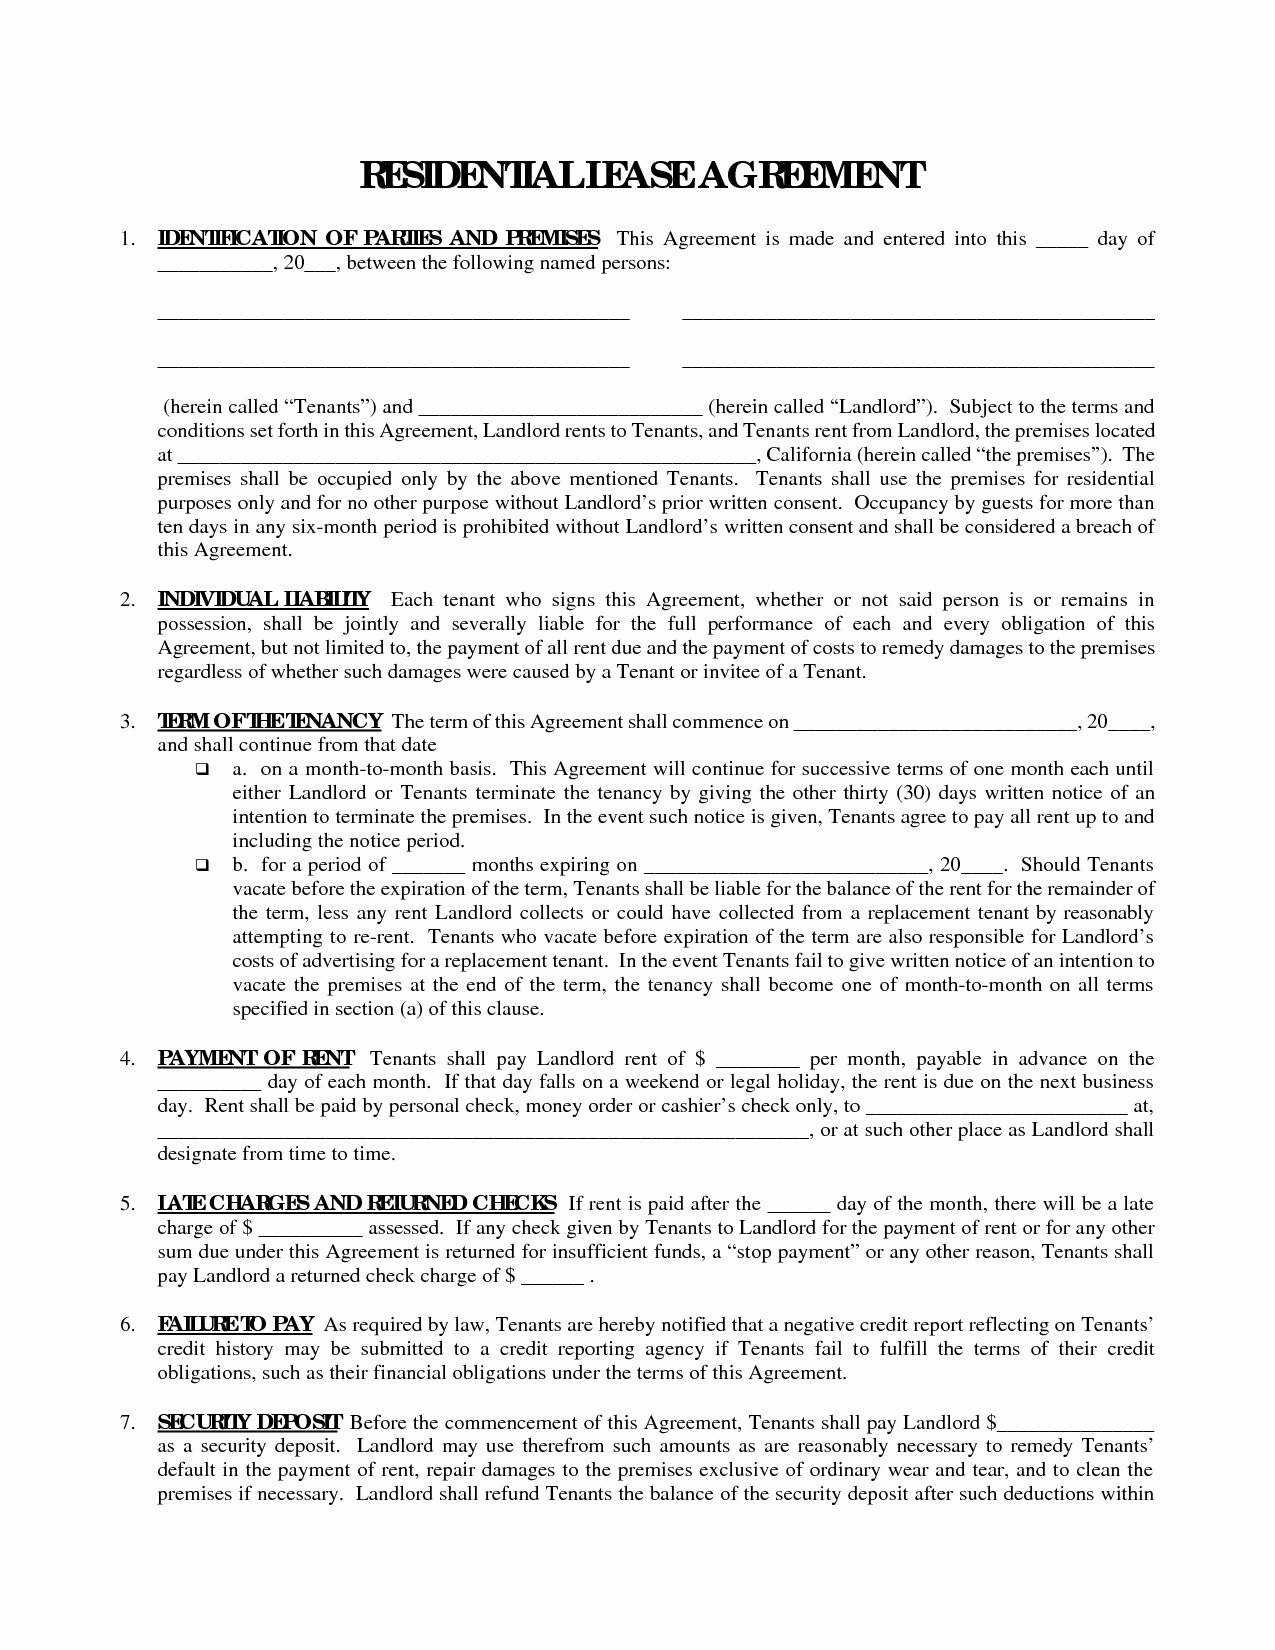 Free Printable Commercial Lease Agreement Luxury Printable Residential Free House Lease Agreement